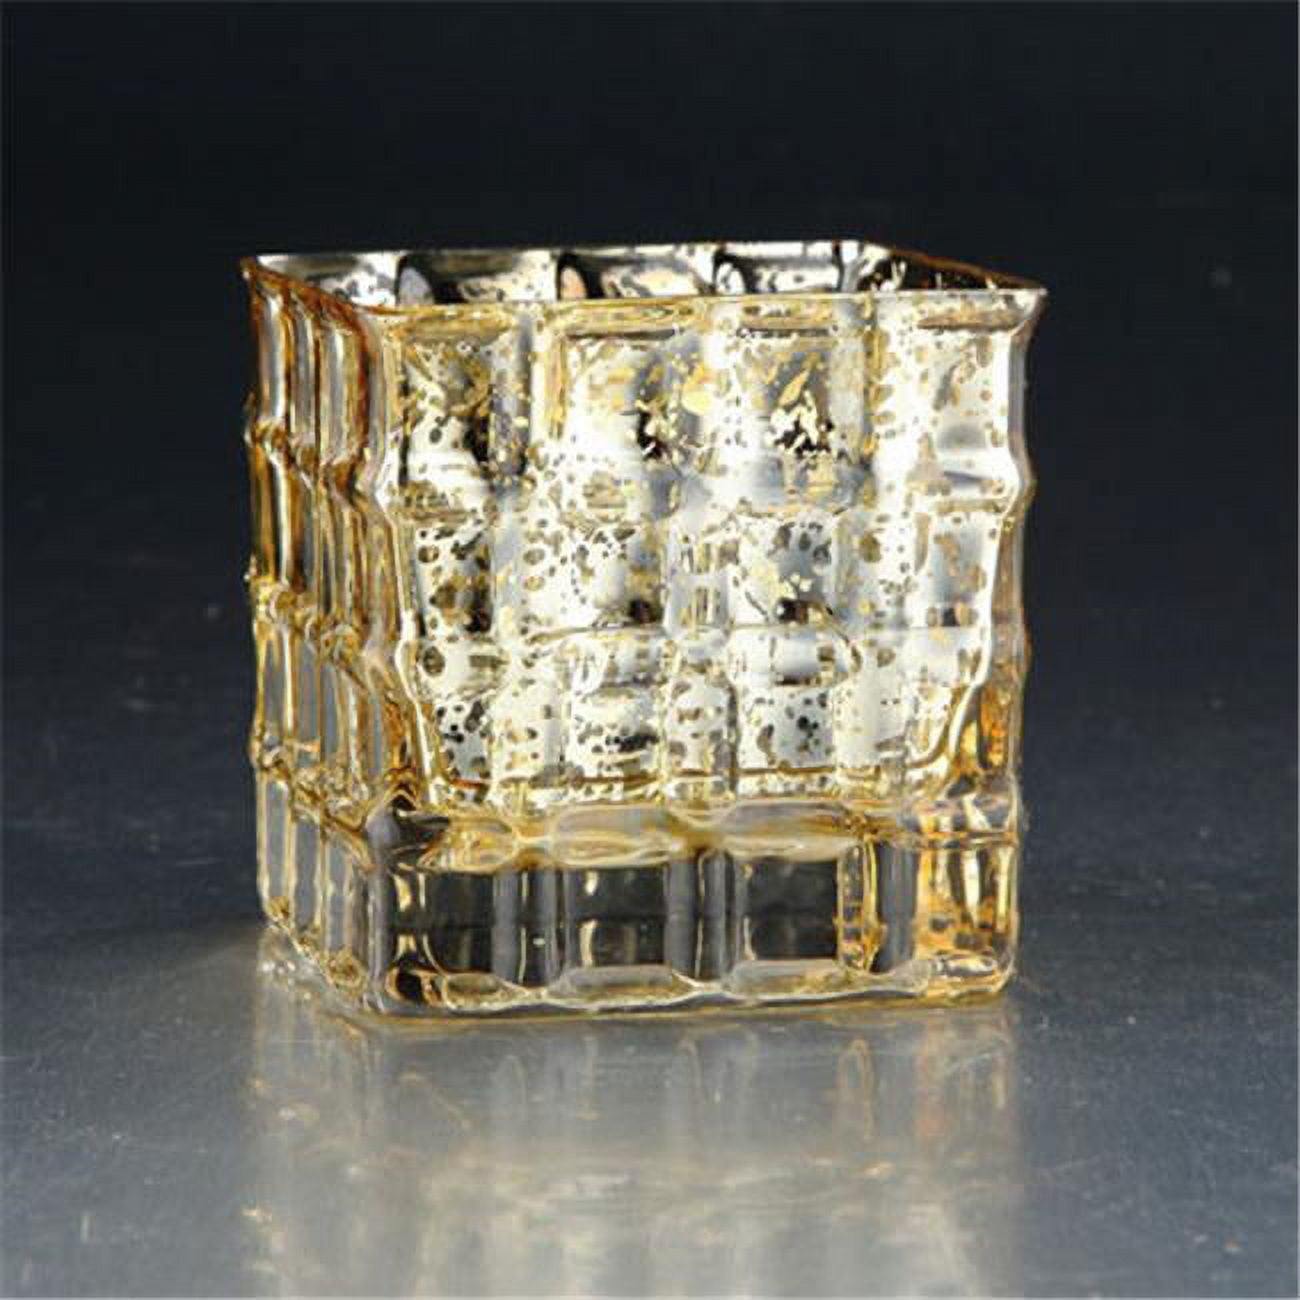 57058 4 X 4 X 4 In. Square Glass Candle Holder, Gold